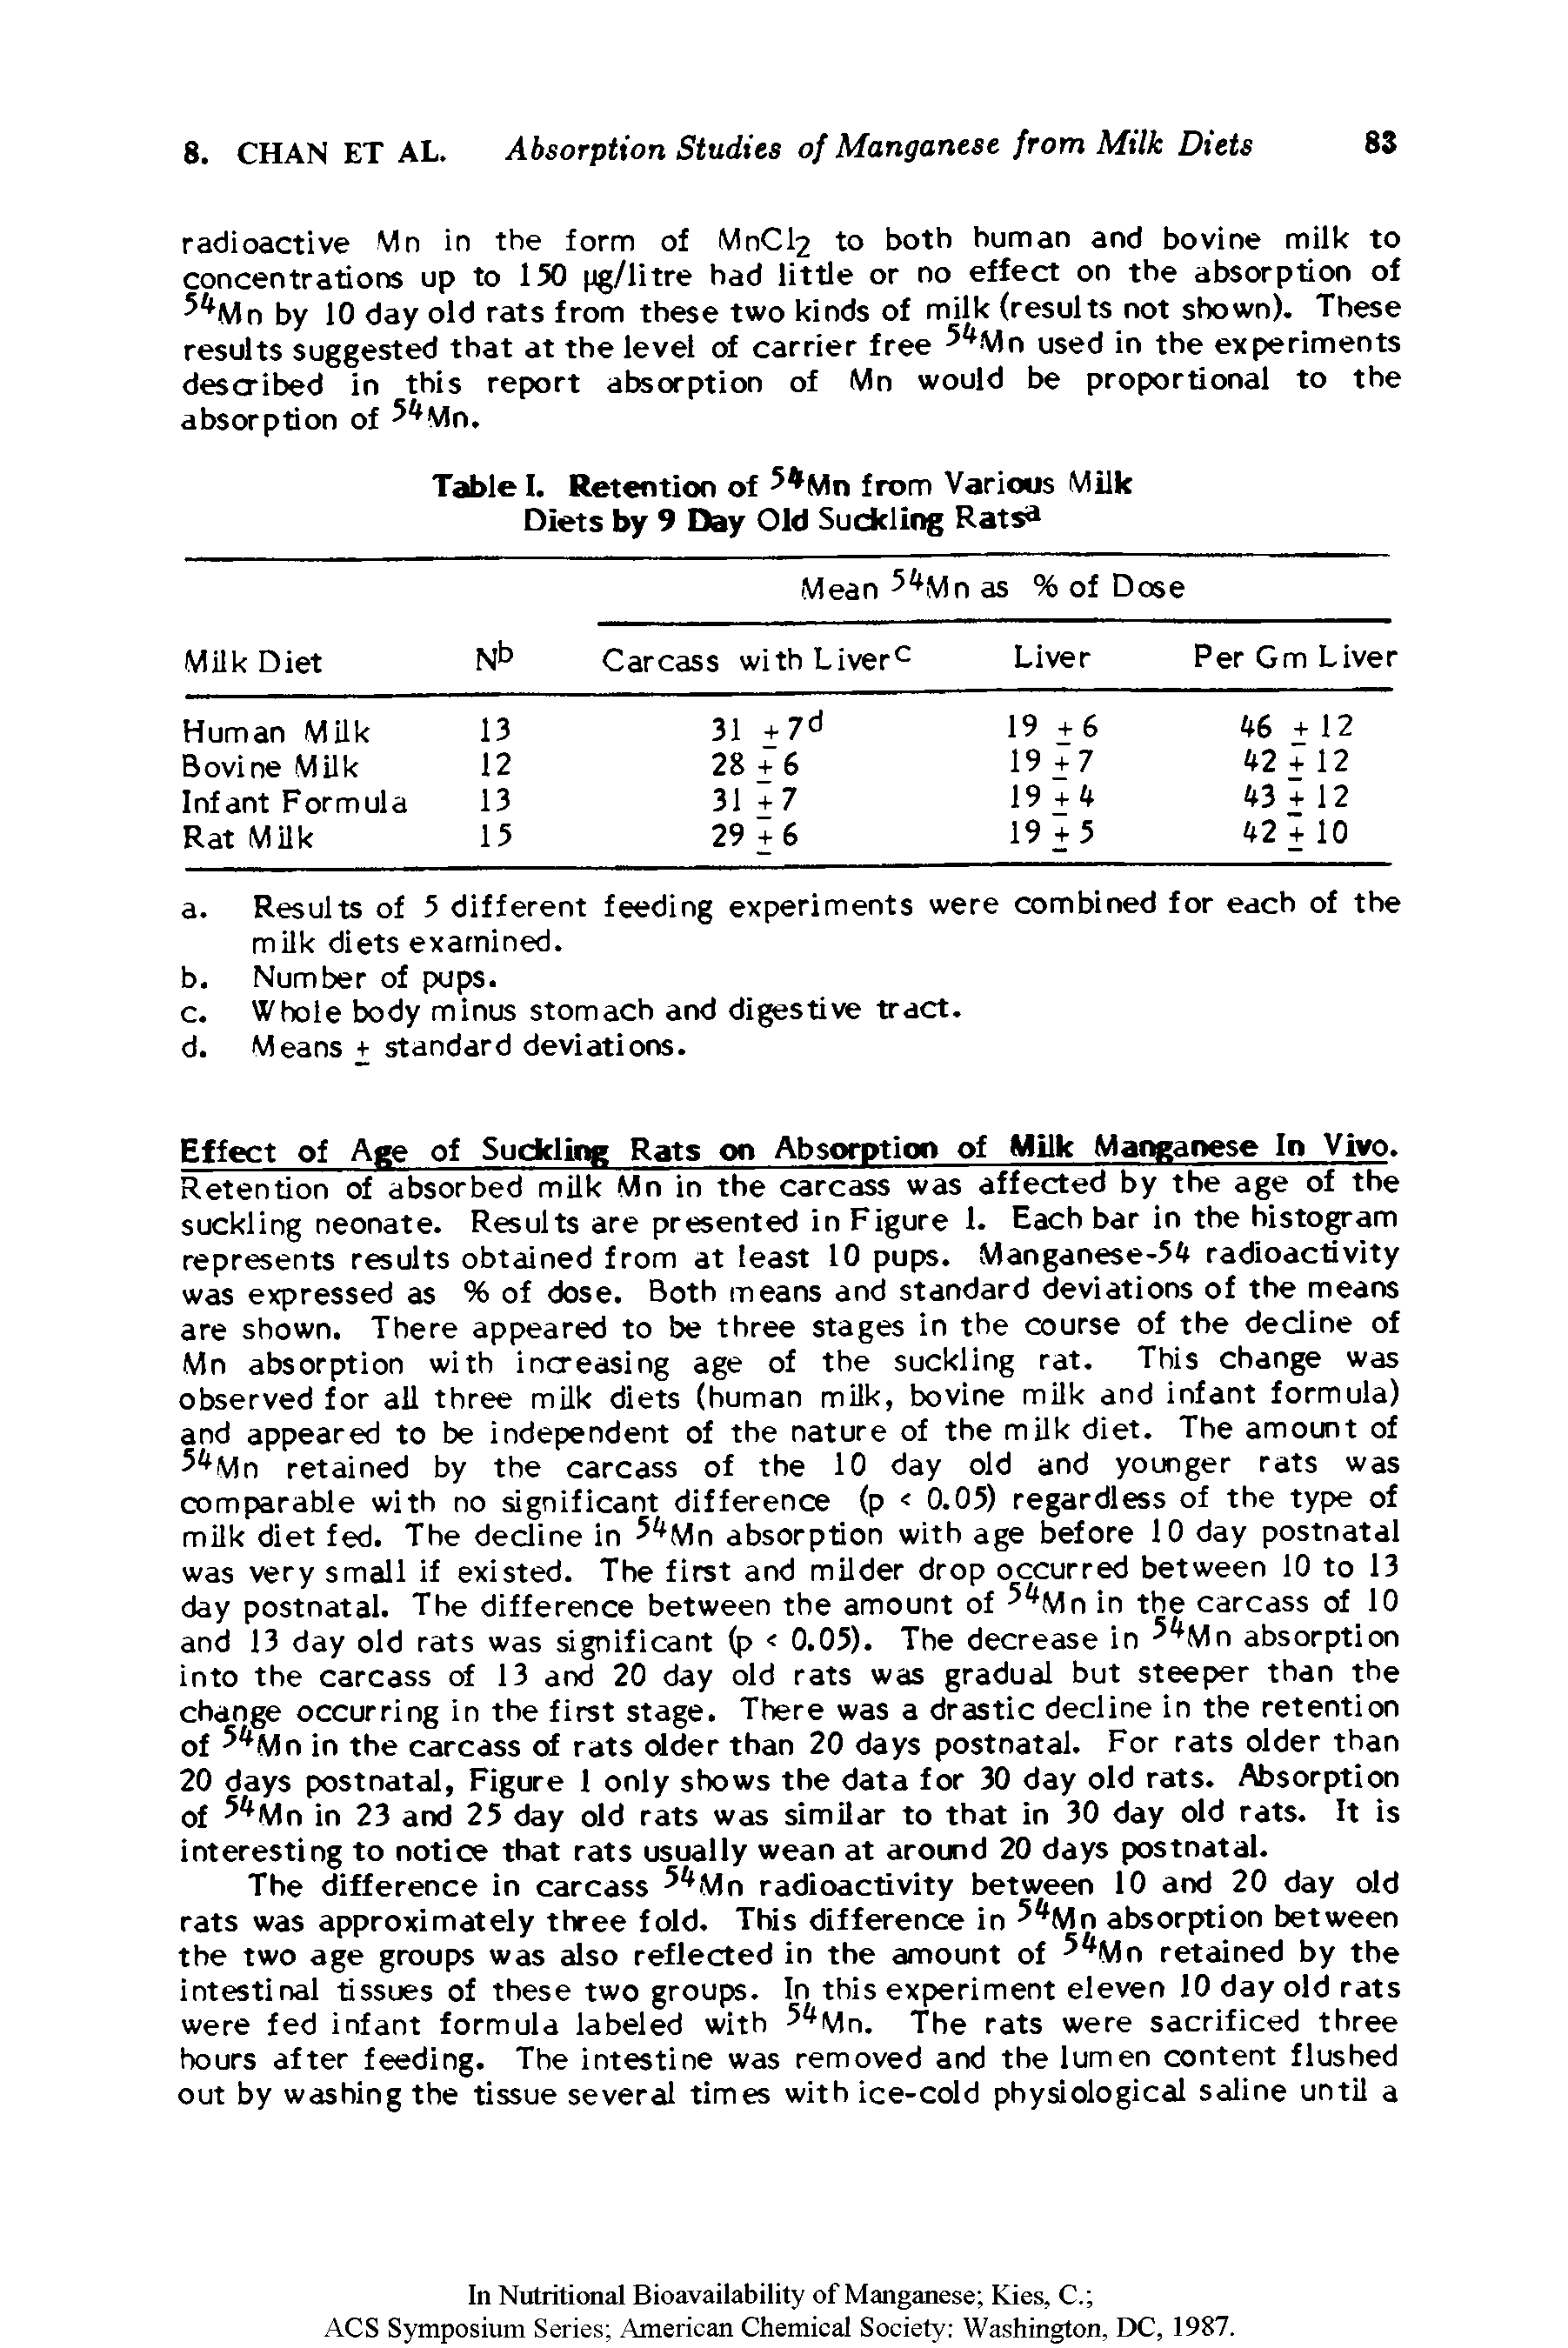 Table I. Retention of Mn from Various Milk Diets by 9 Day Old Suckling Rats ...